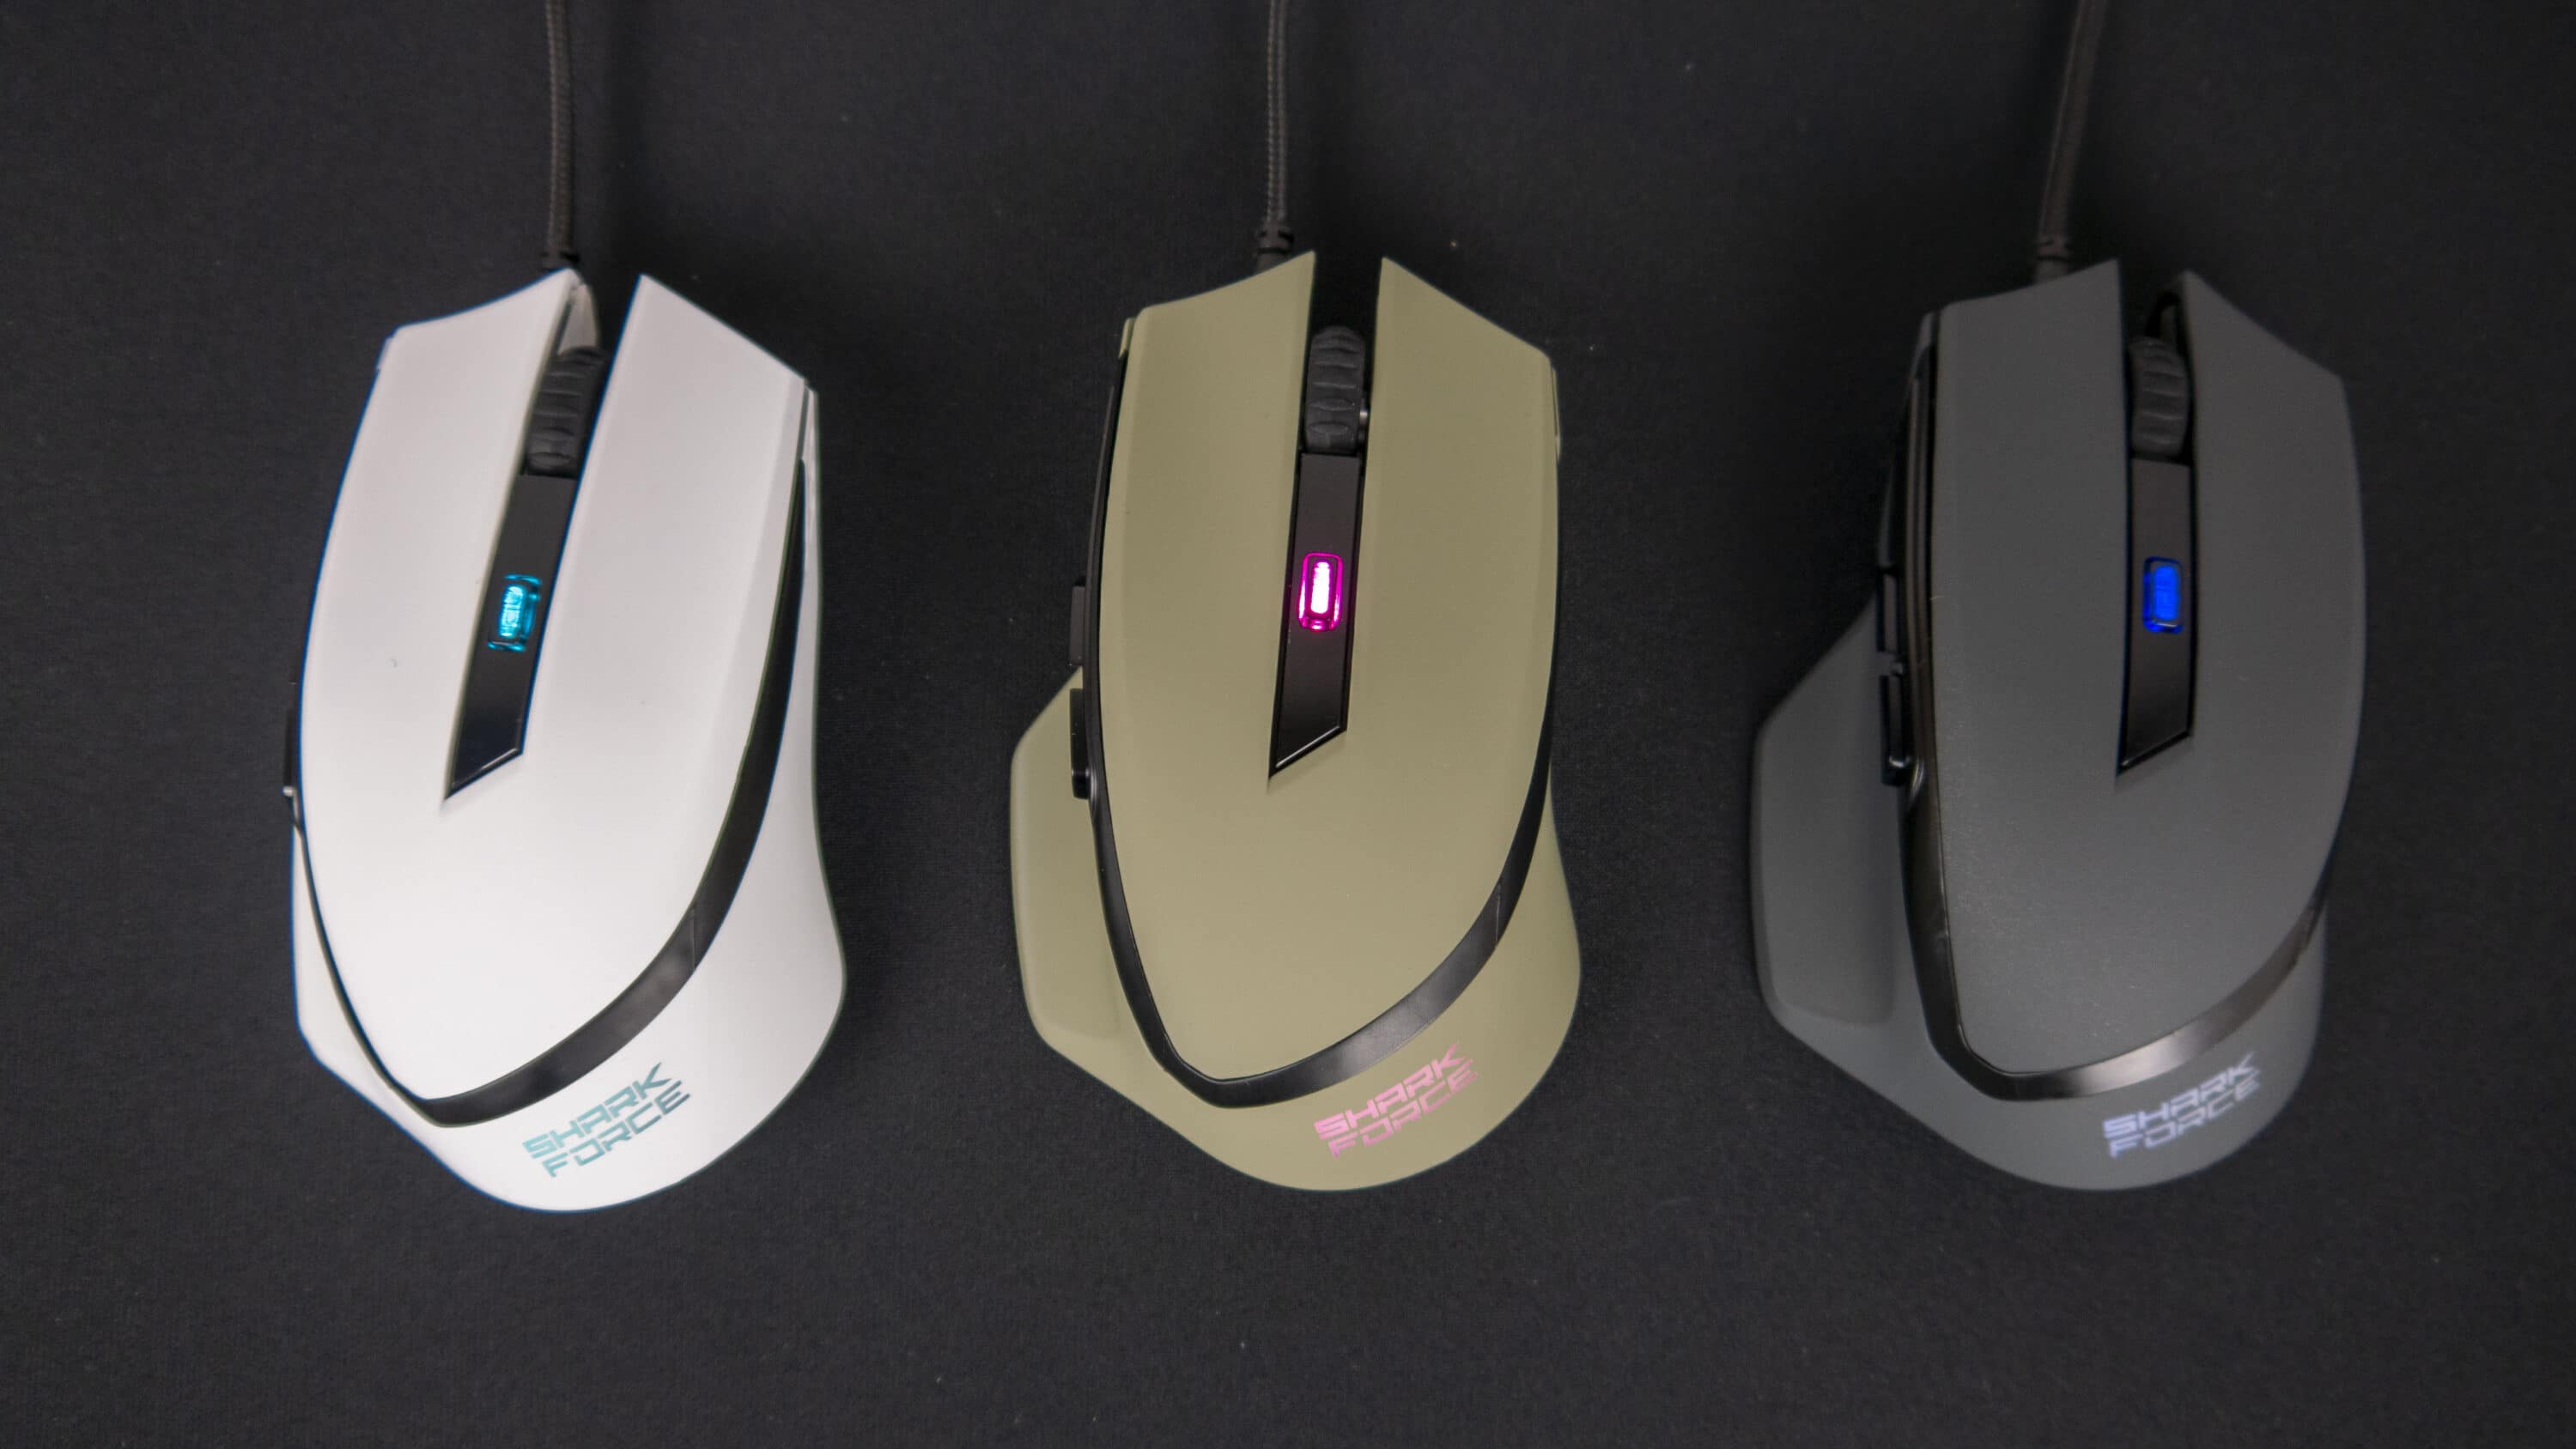 Cheap or low-priced? The Sharkoon Shark Force ll gaming mouse in test | PC-Mäuse